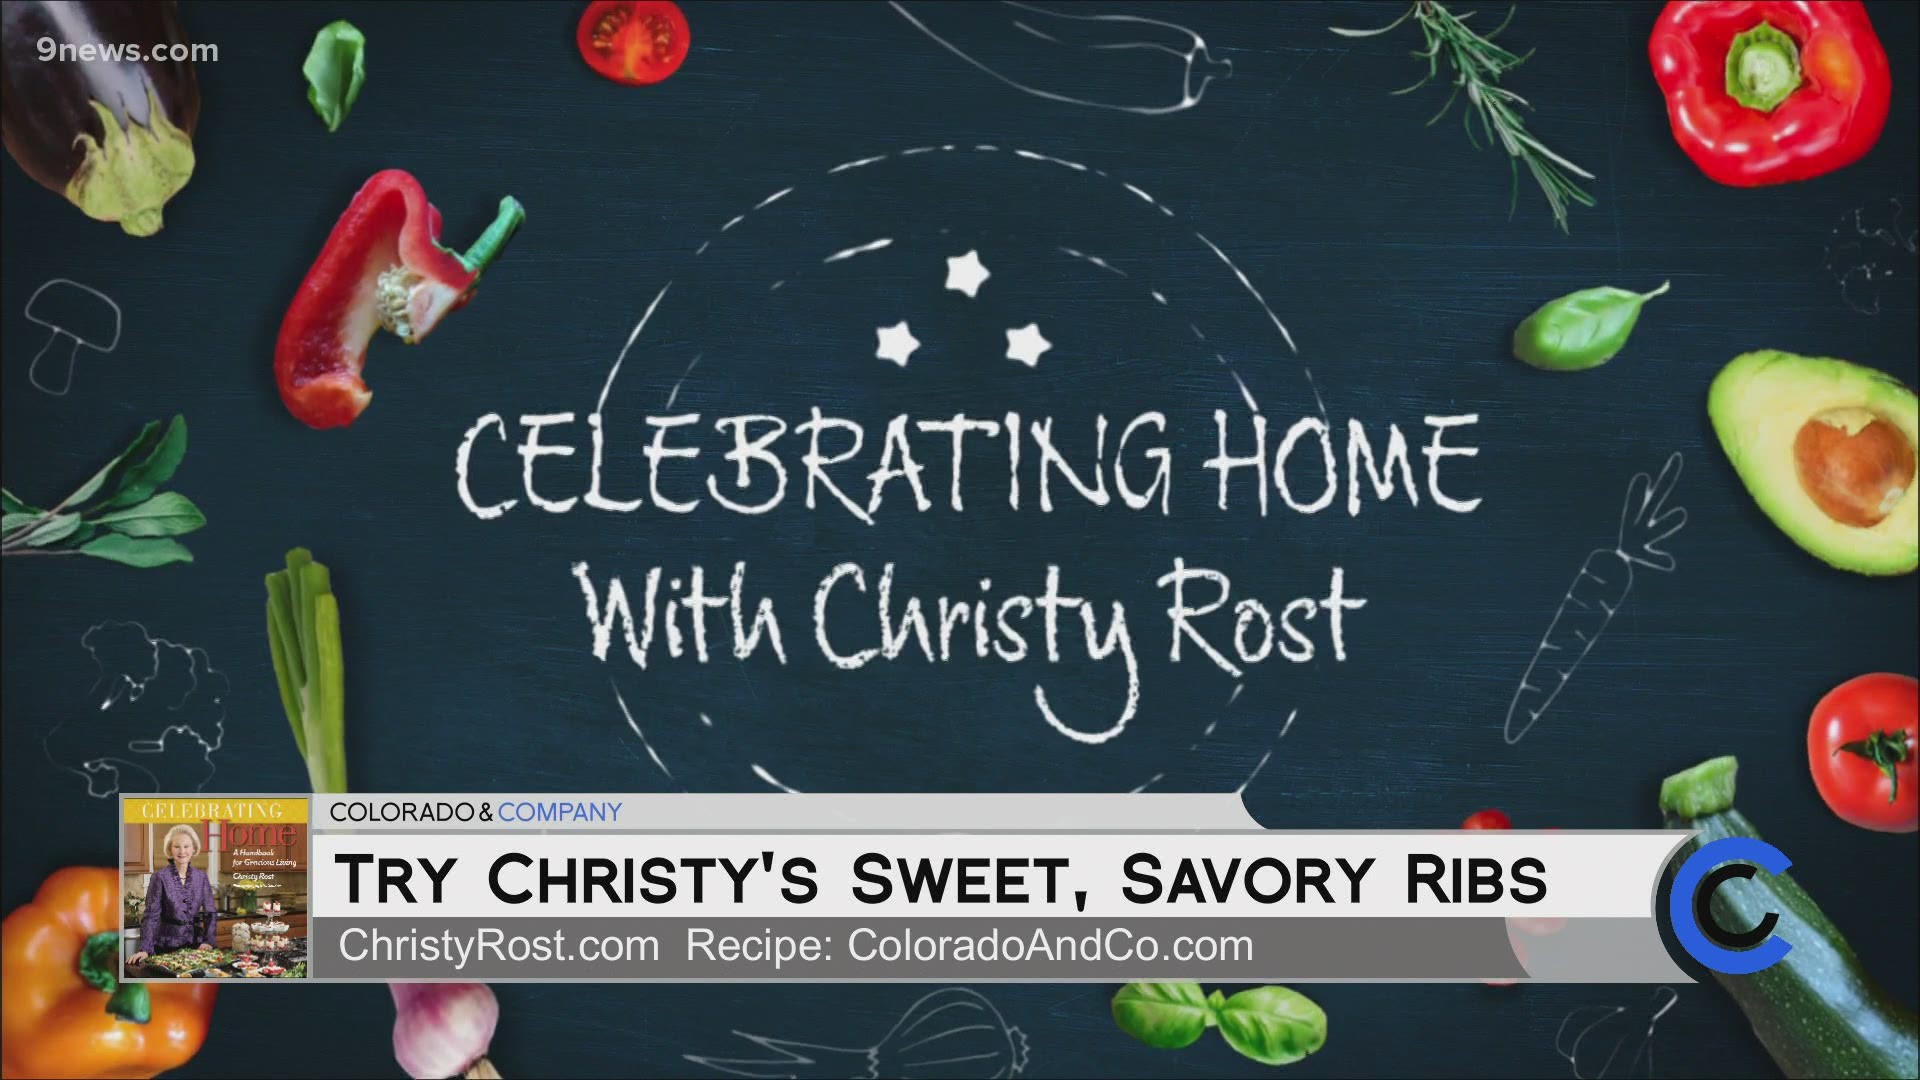 Learn more about Christy and find more recipes at ChristyRost.com.